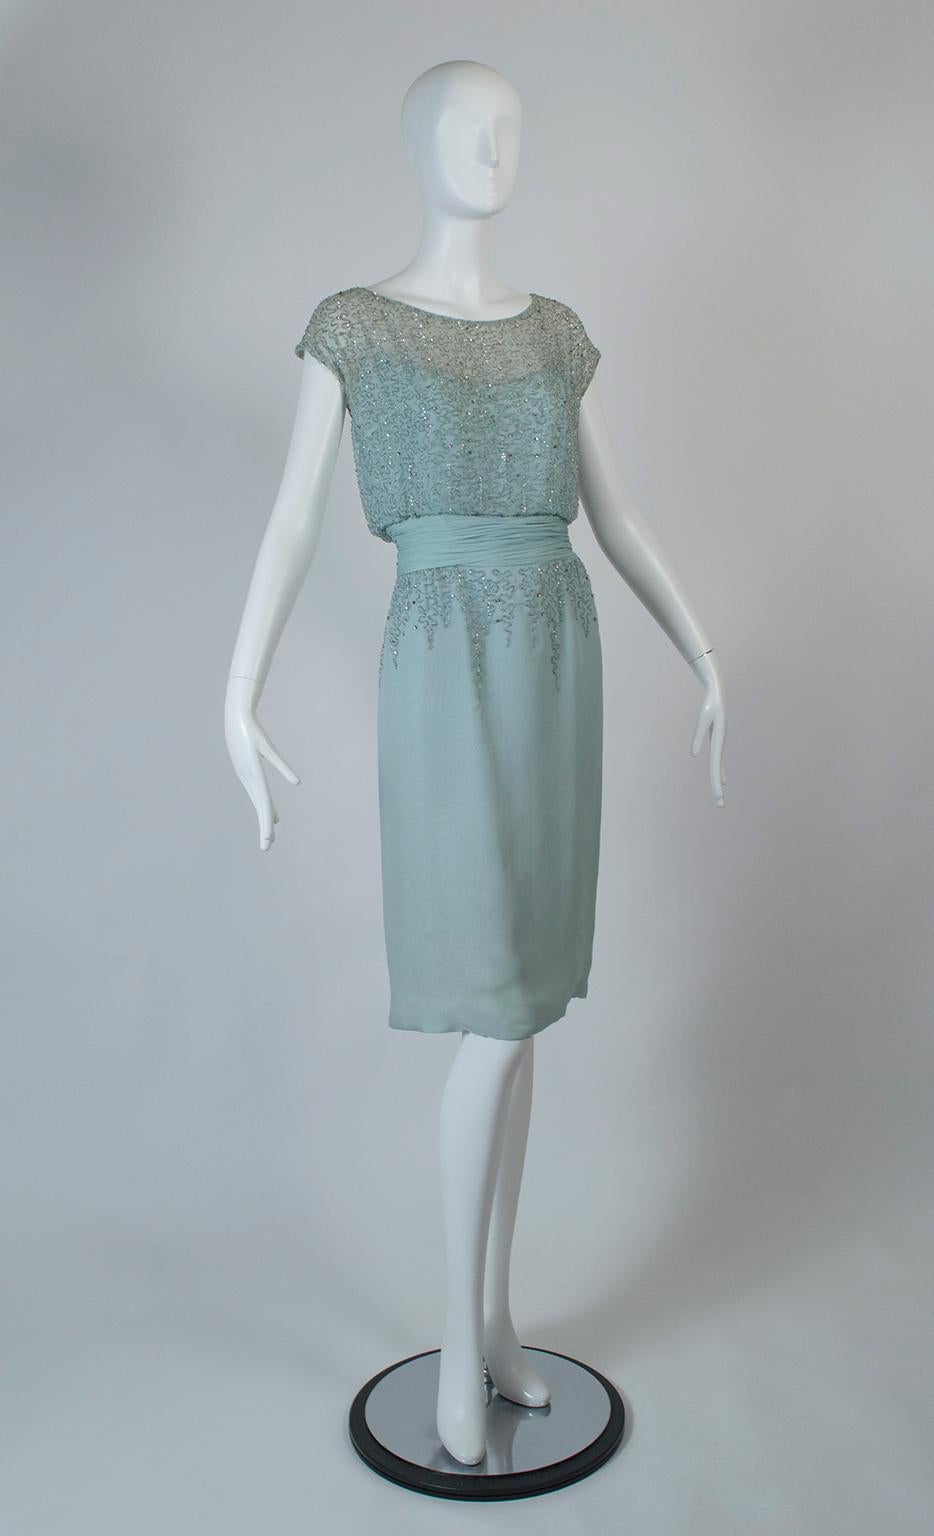 Neither mint green nor light blue, this dress’s resemblance to ocean mist is only underscored by its sparkling beaded bodice and hips. Its featherweight fabric, dusting of rhinestones and draped pleated cummerbund make a gentle, elegant impression